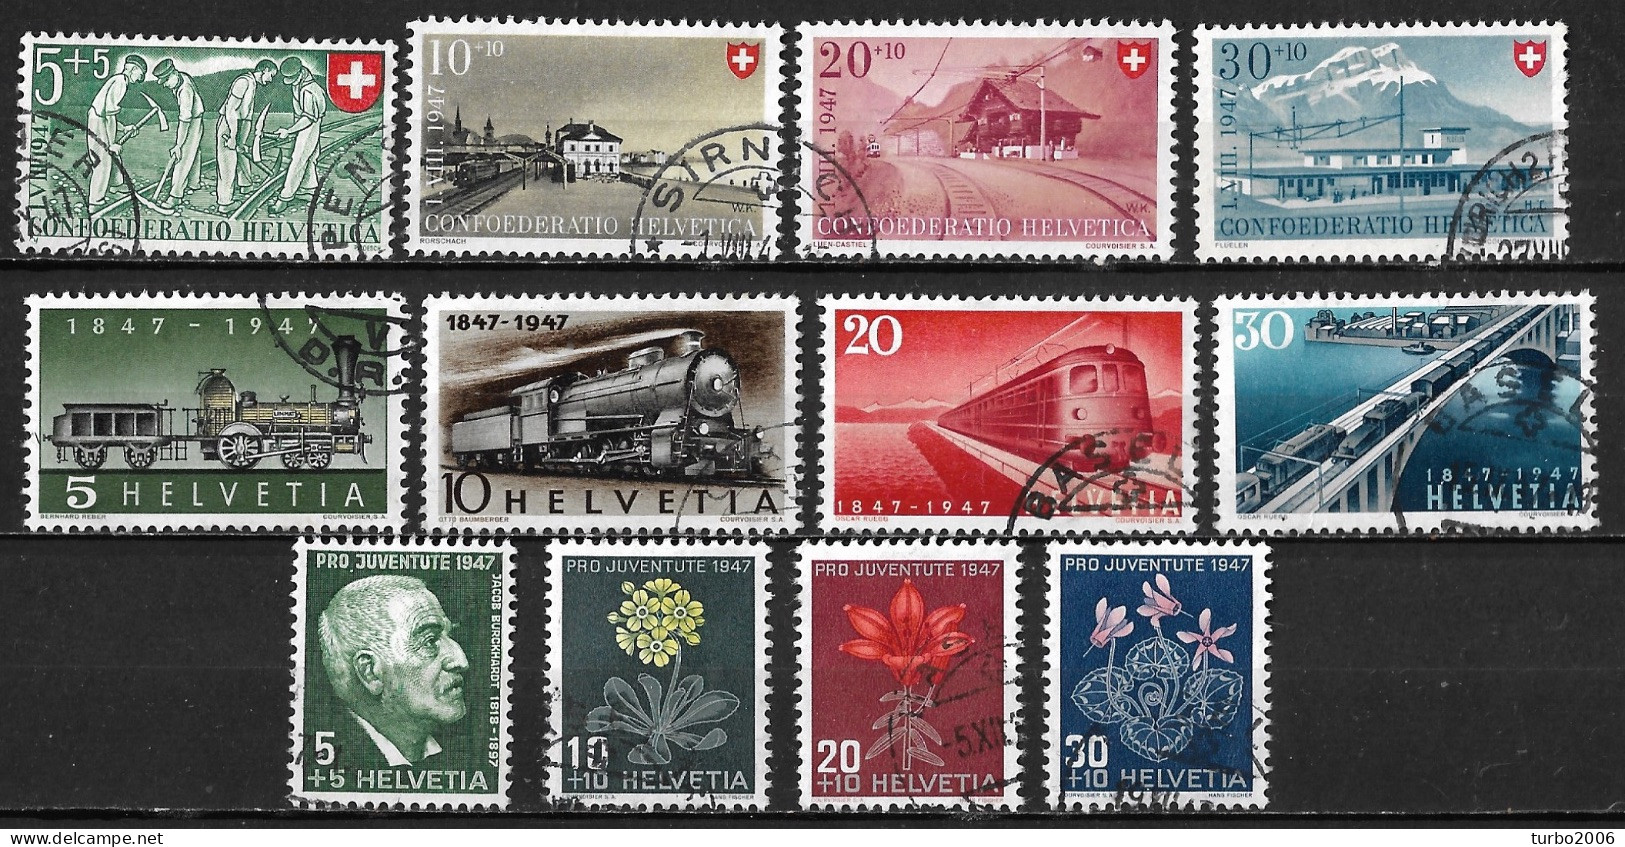 Switzerland / Schweiz / Suisse : 1947 Complete Year All Sets Used (without Airmail) Michel 480 / 491 - Oblitérés